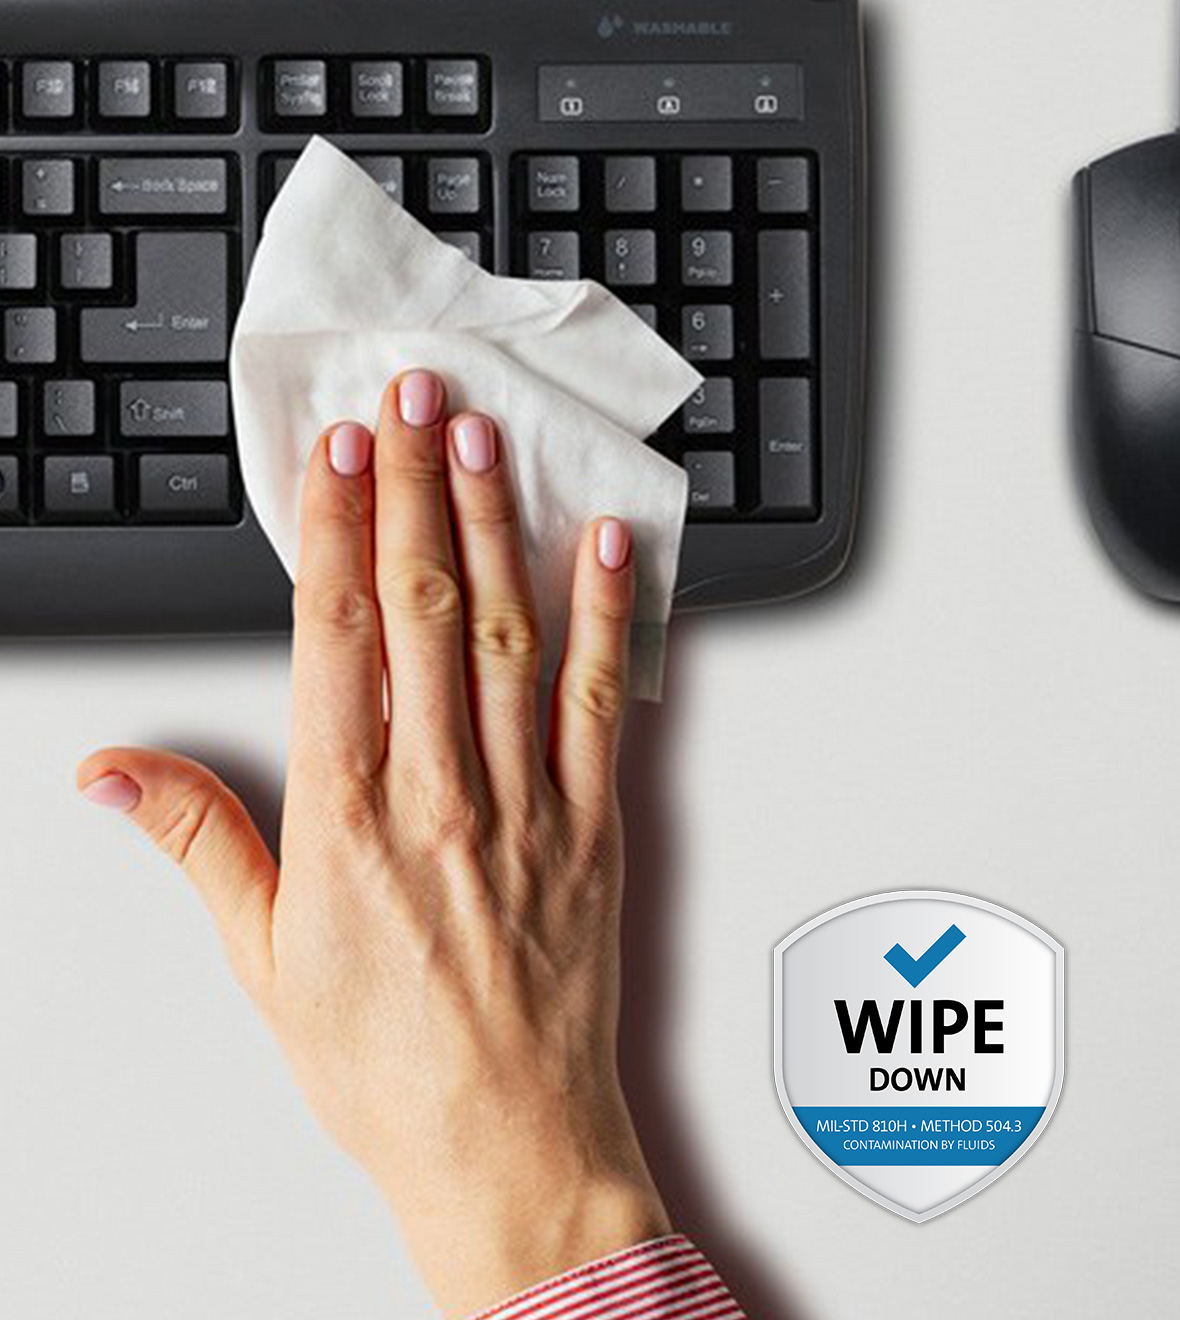 Woman wiping a kensington keyboard with a wet towel and wipe tested approved badge